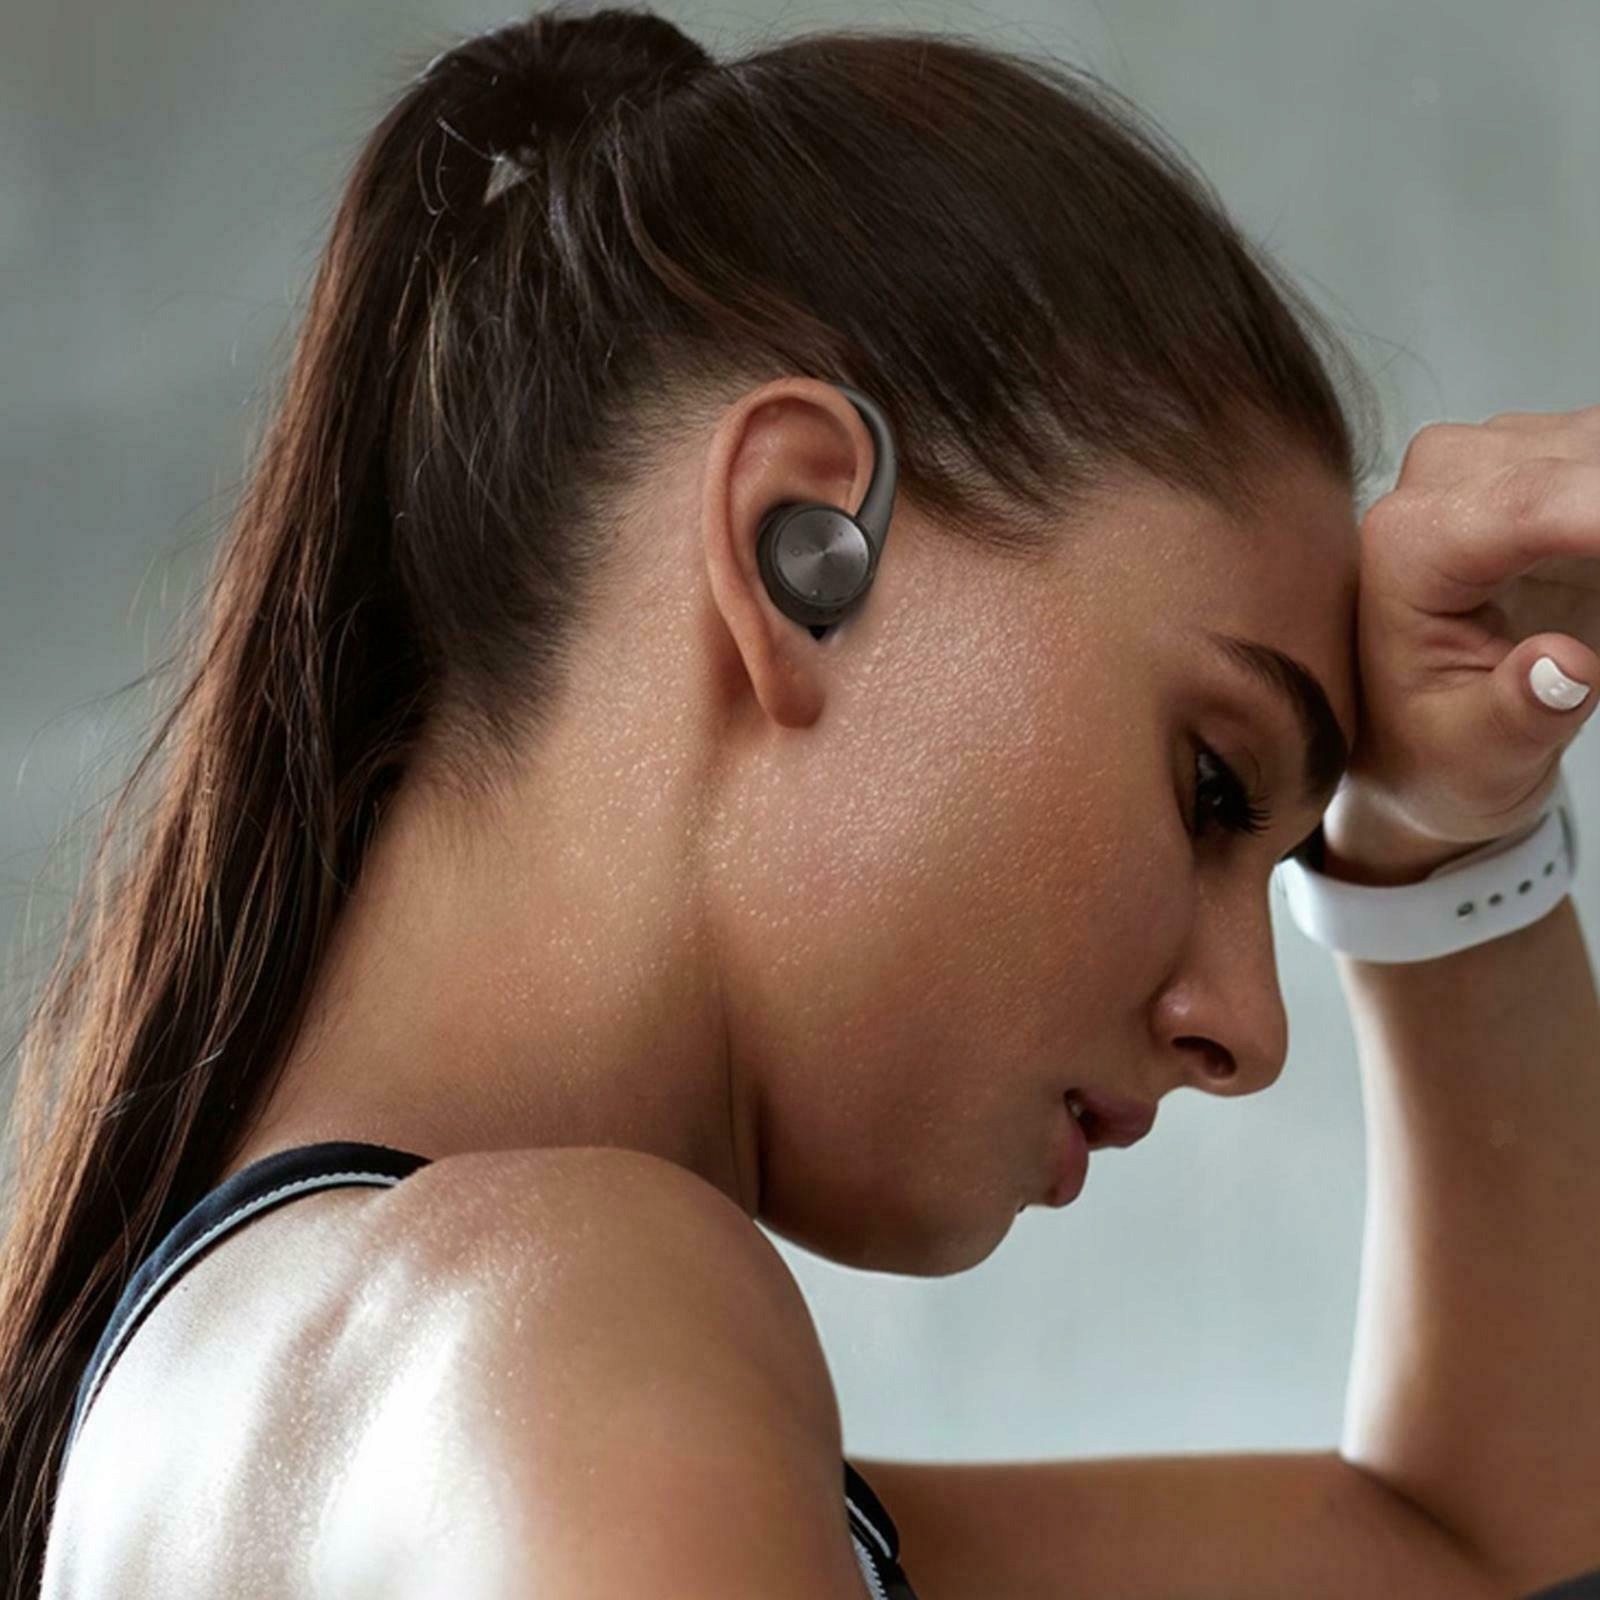 Sports bluetooth headphones for running power bank. Type of headphones behind the ear